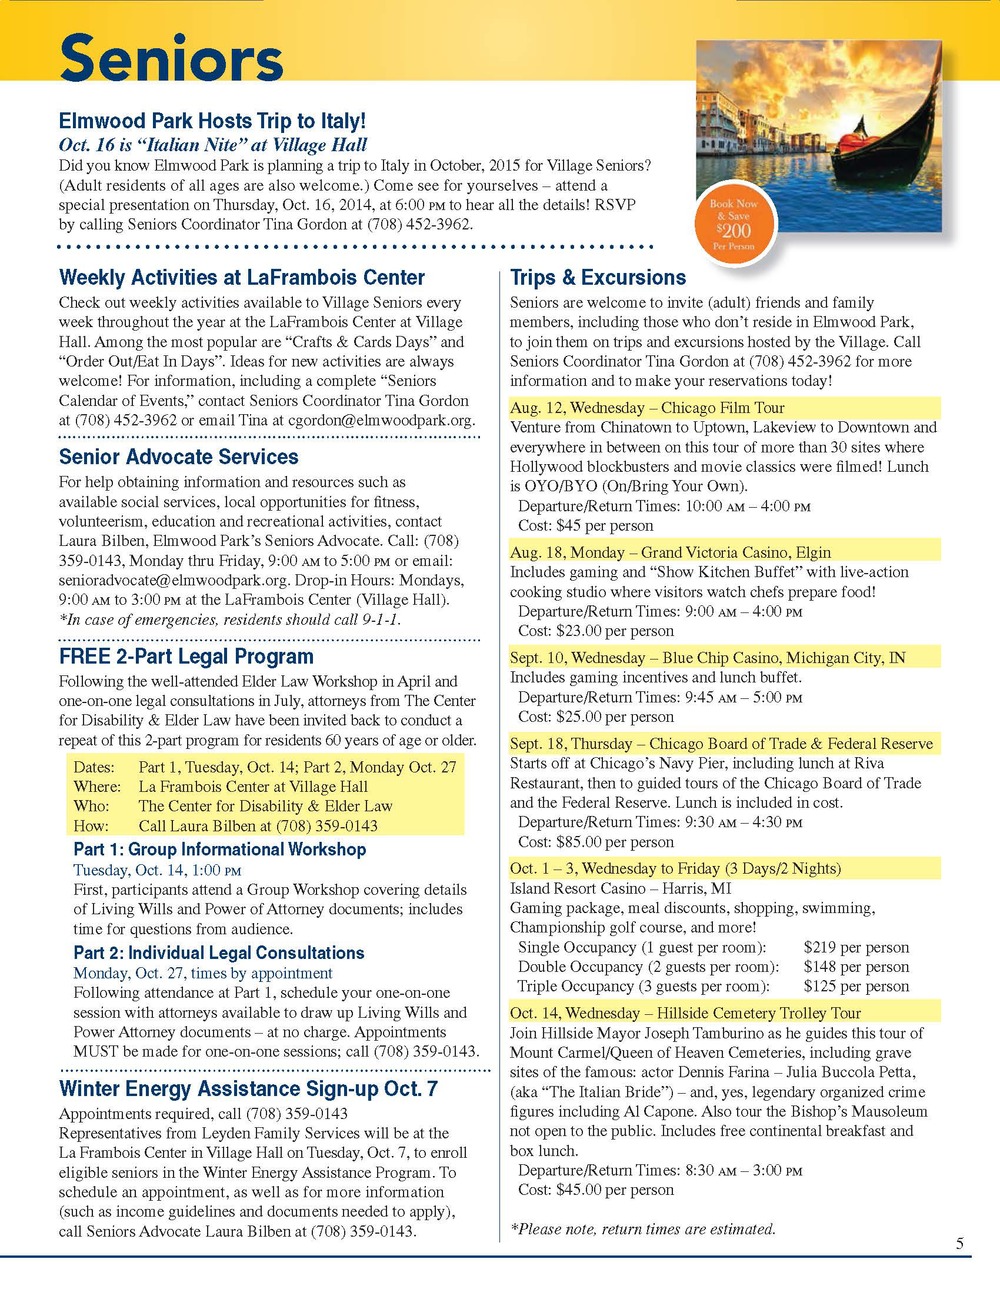 August 2014 EP Newsletter_Page_5.jpg